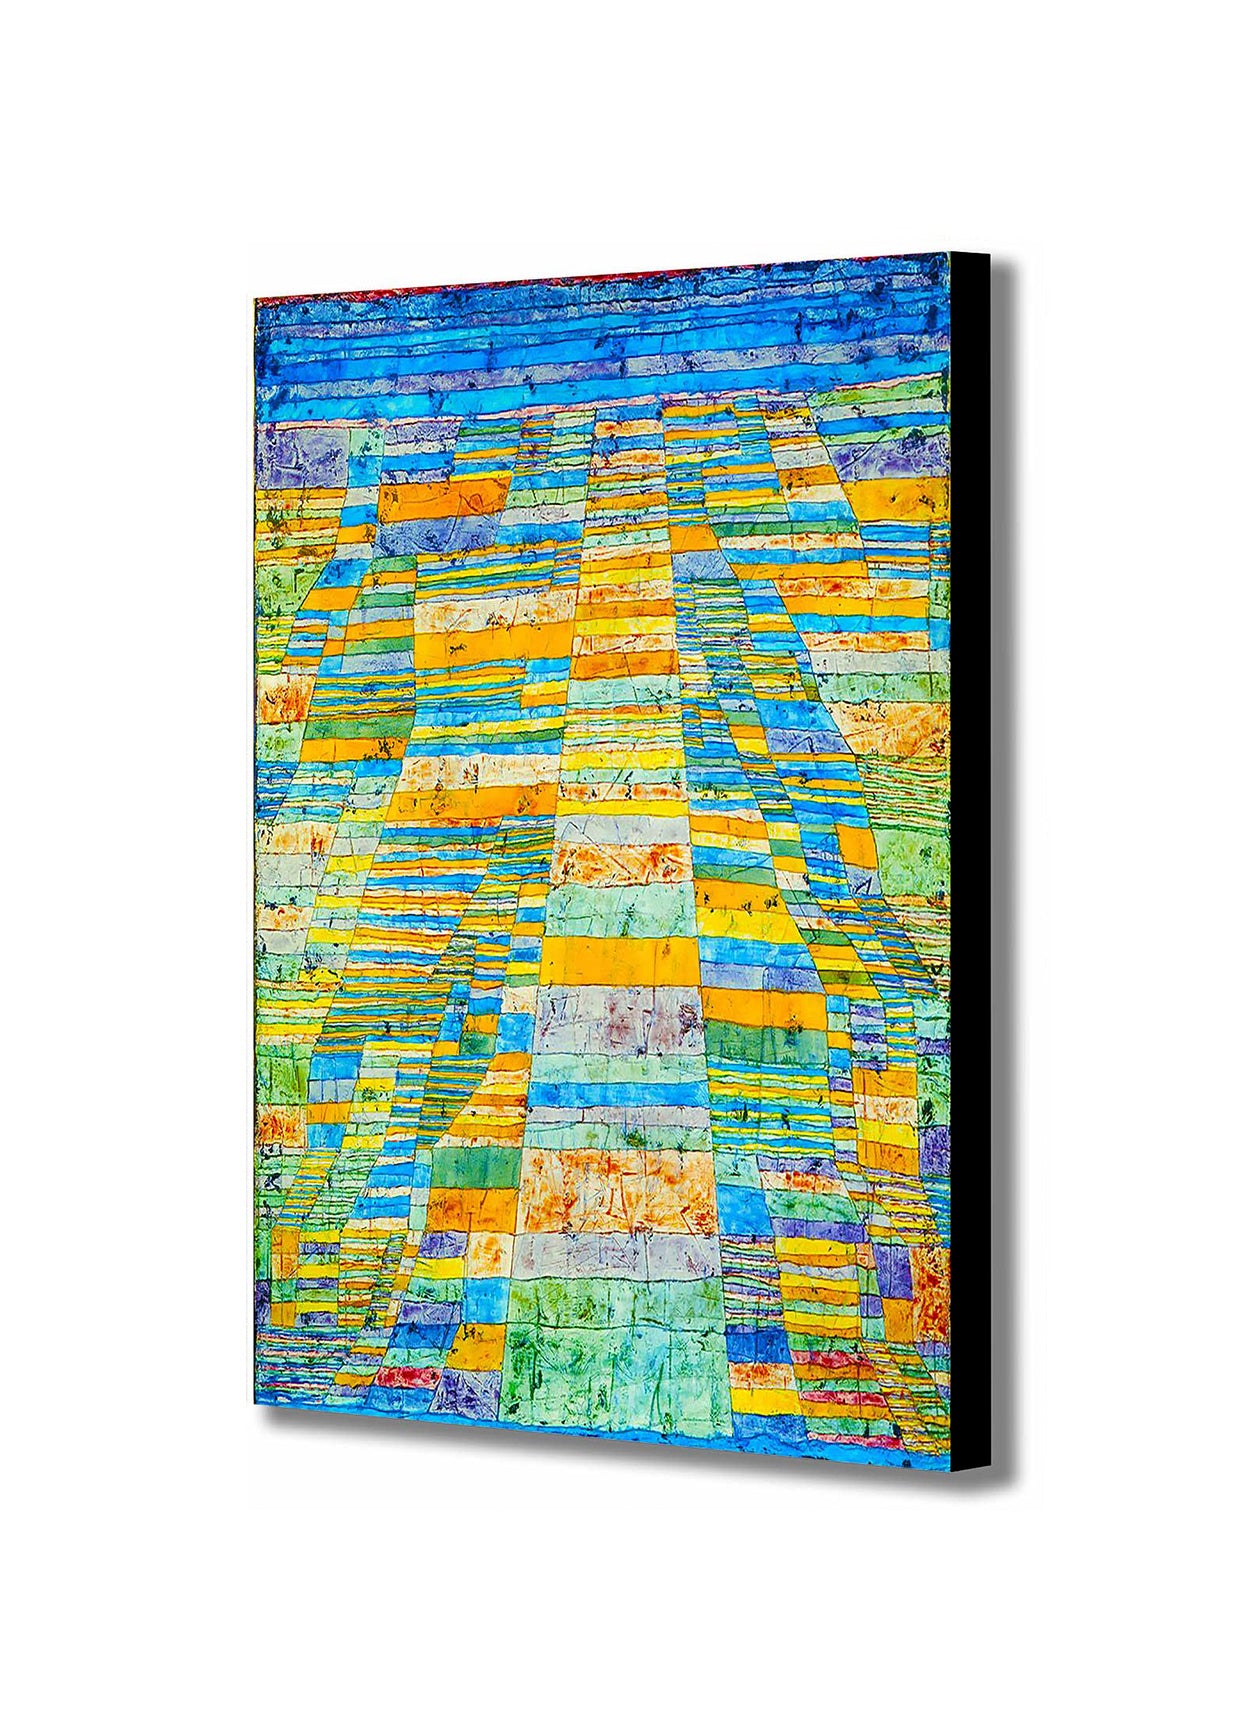 Main Road and Byways - Abstract by Paul Klee - 1929 - Canvas Wall Art Framed Print - Various Sizes